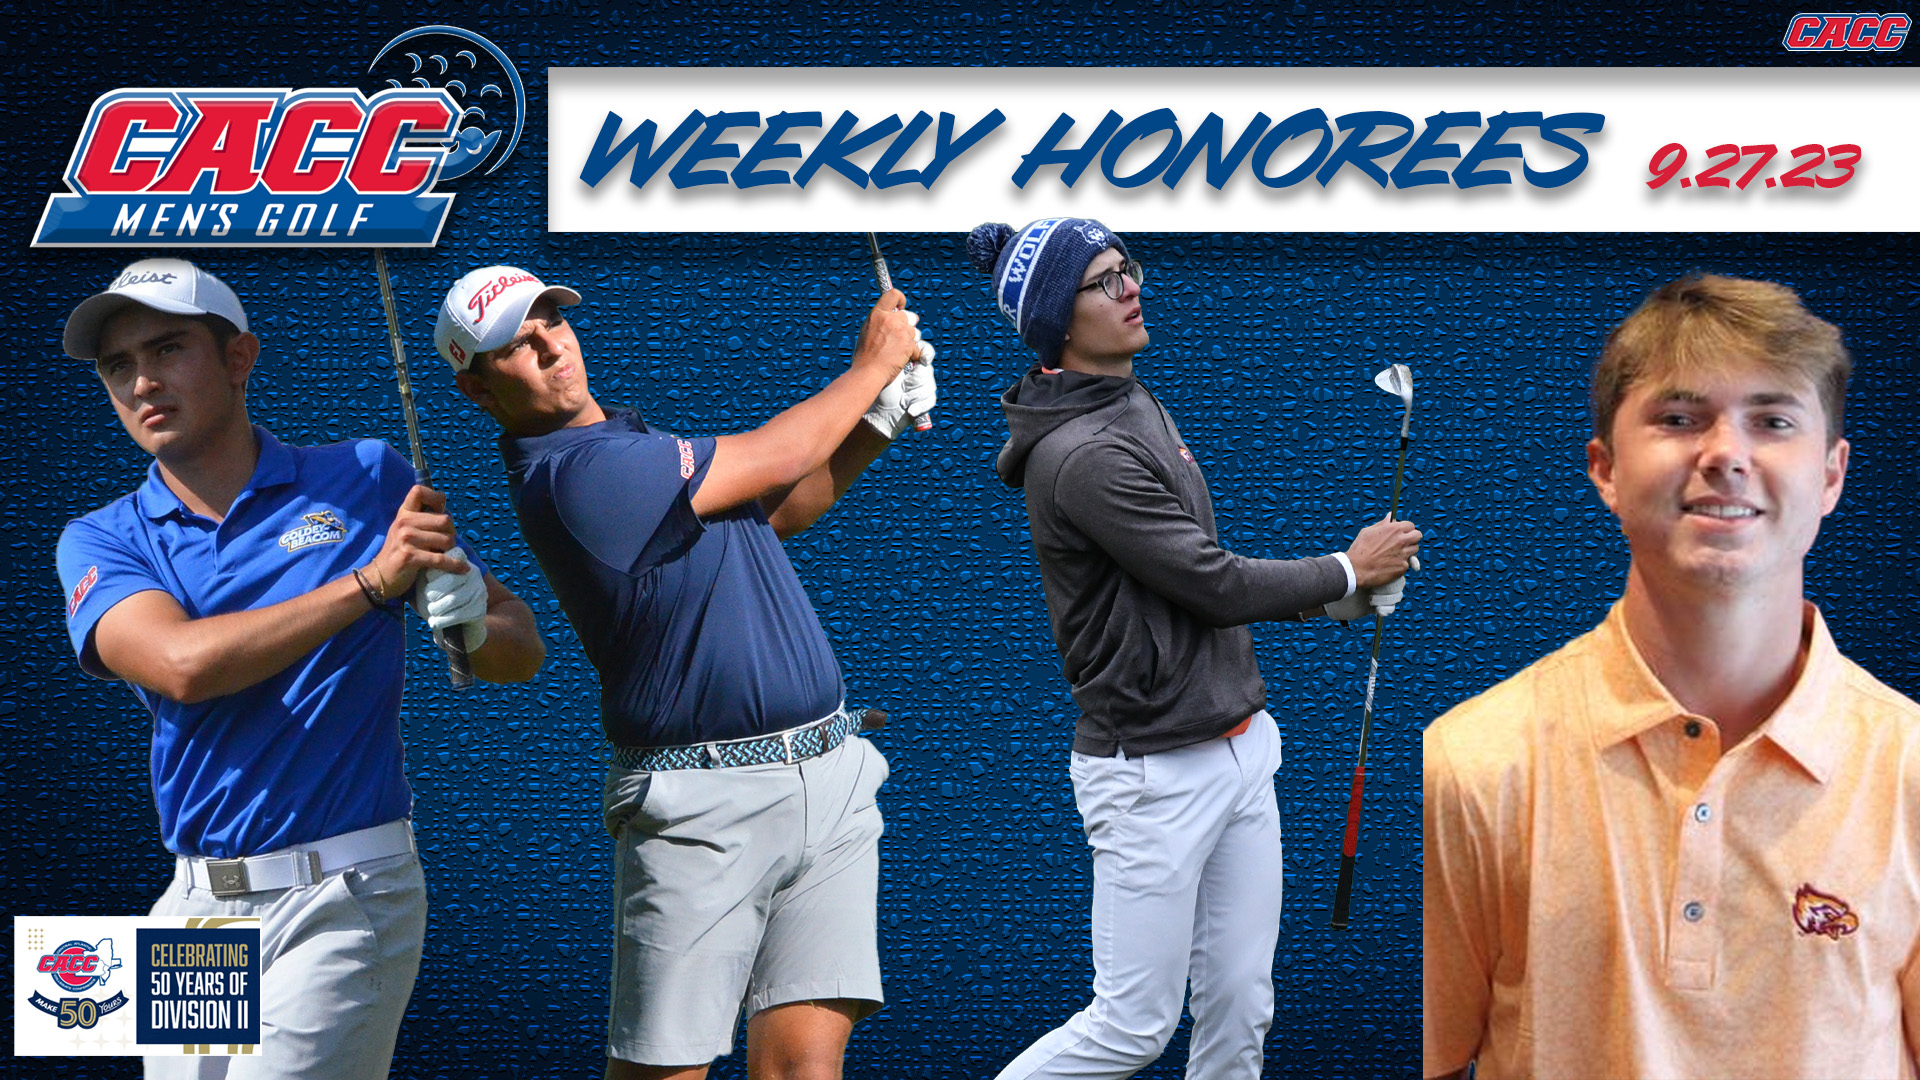 CACC Men's Golf Weekly Honorees (9-27-23)